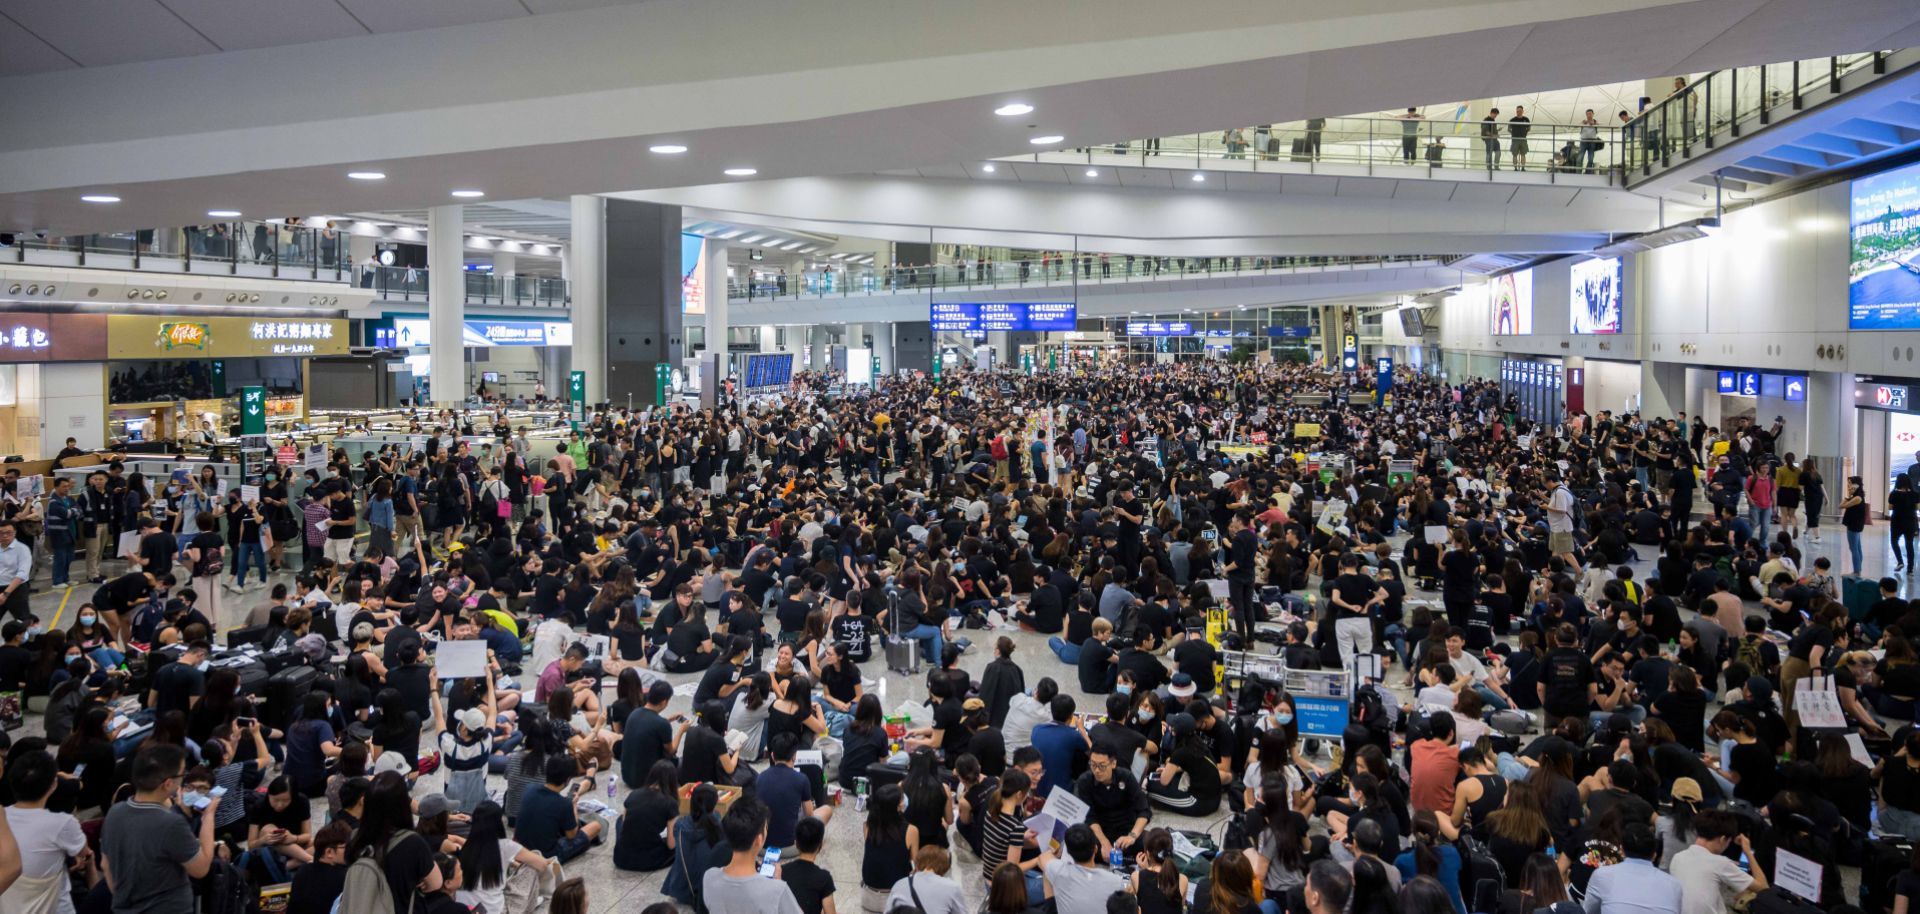 Pro-democracy protesters fill the arrivals terminal of Hong Kong International Airport on July 26, 2019.